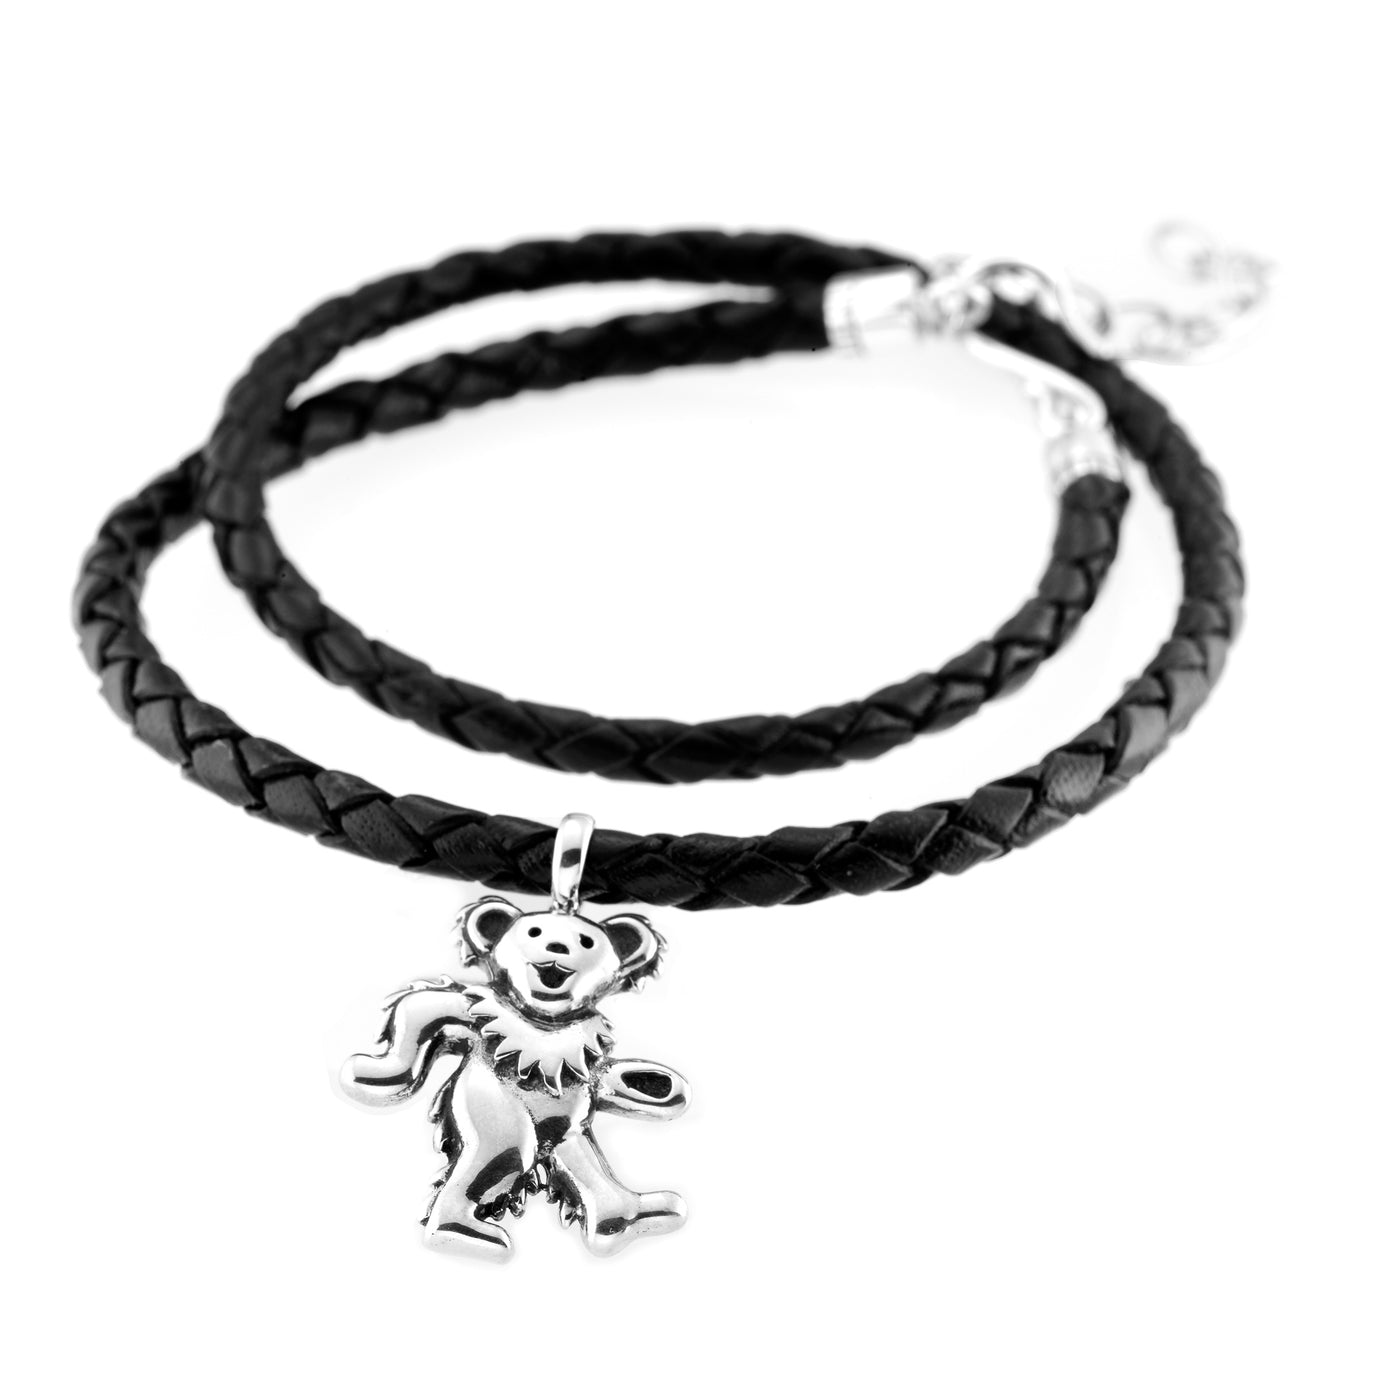 Dancing Bear Sterling Silver Charm Woven Leather Necklace